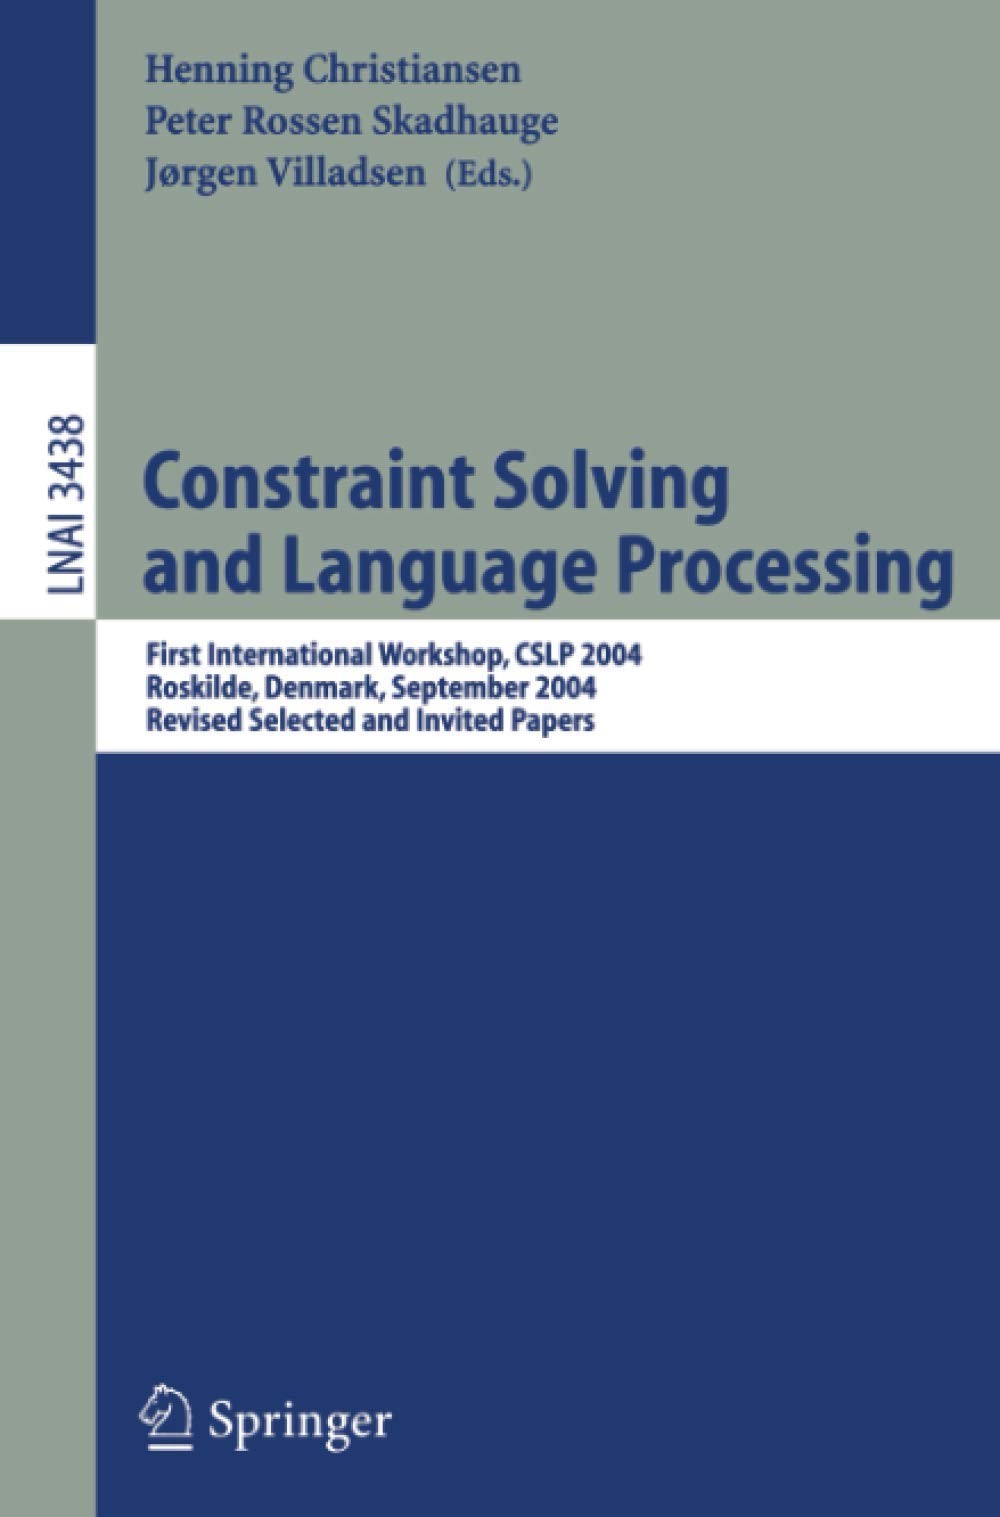 Constraint Solving and Language Processing: First International Workshop, CSLP 2004, Roskilde, Denmark, September 1-3, 2004, Revised Selected and Invited Papers